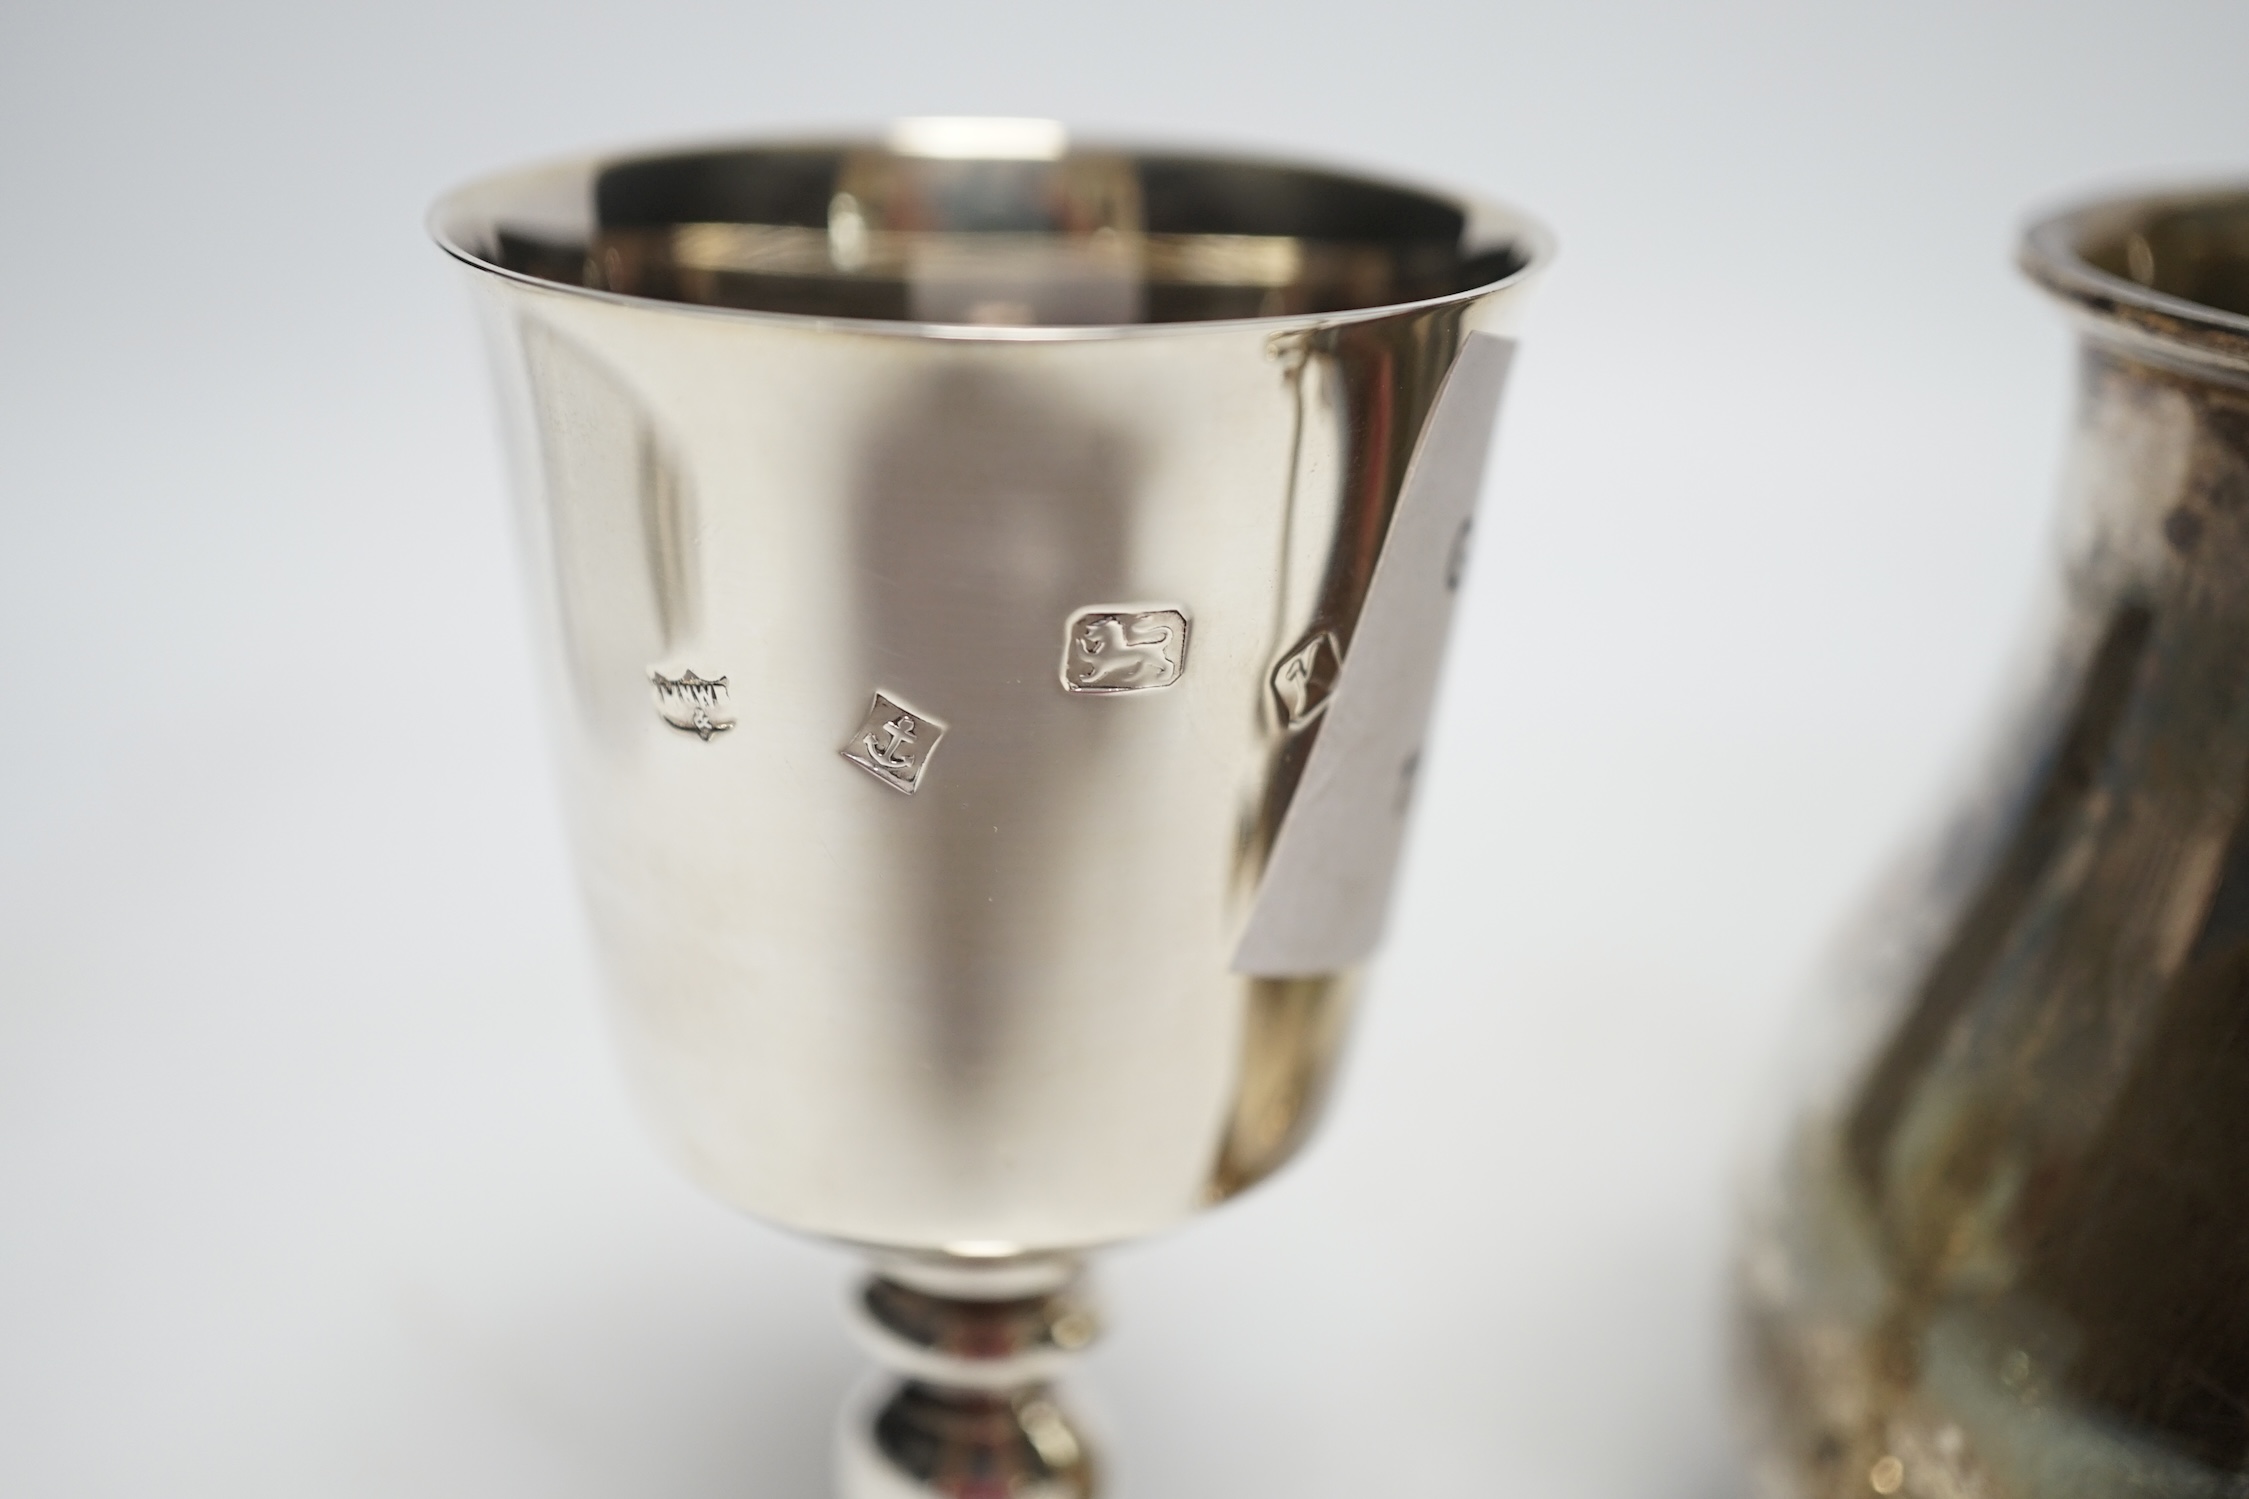 Sundry silver including a modern pig vesta case, two goblets, a match box sleeve and modern cream jug. Fair condition.